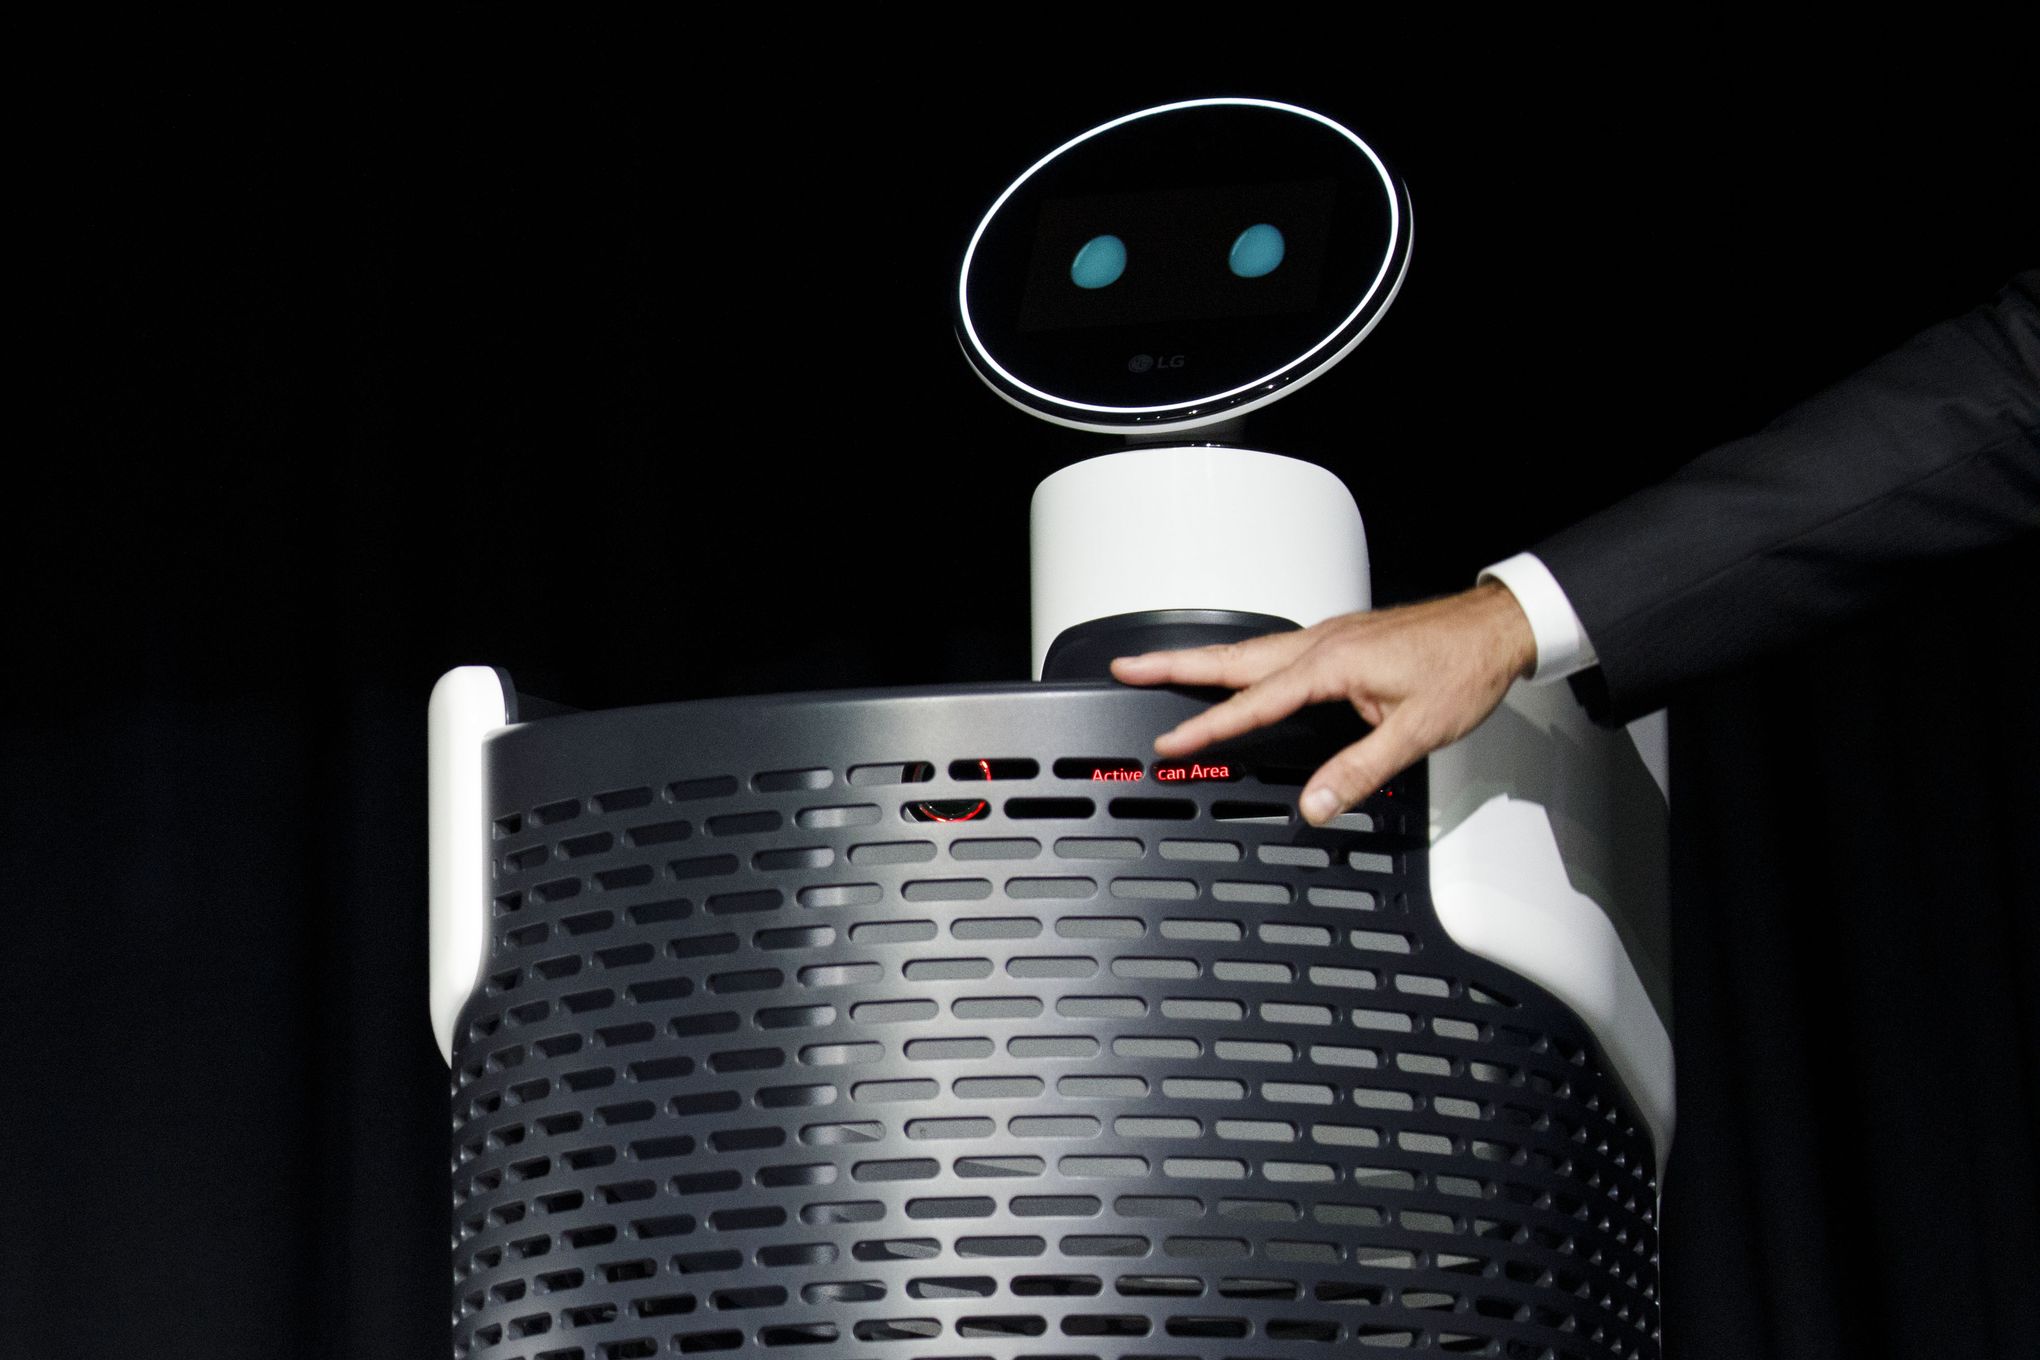 LG unveils two-legged AI robot that controls home appliances and